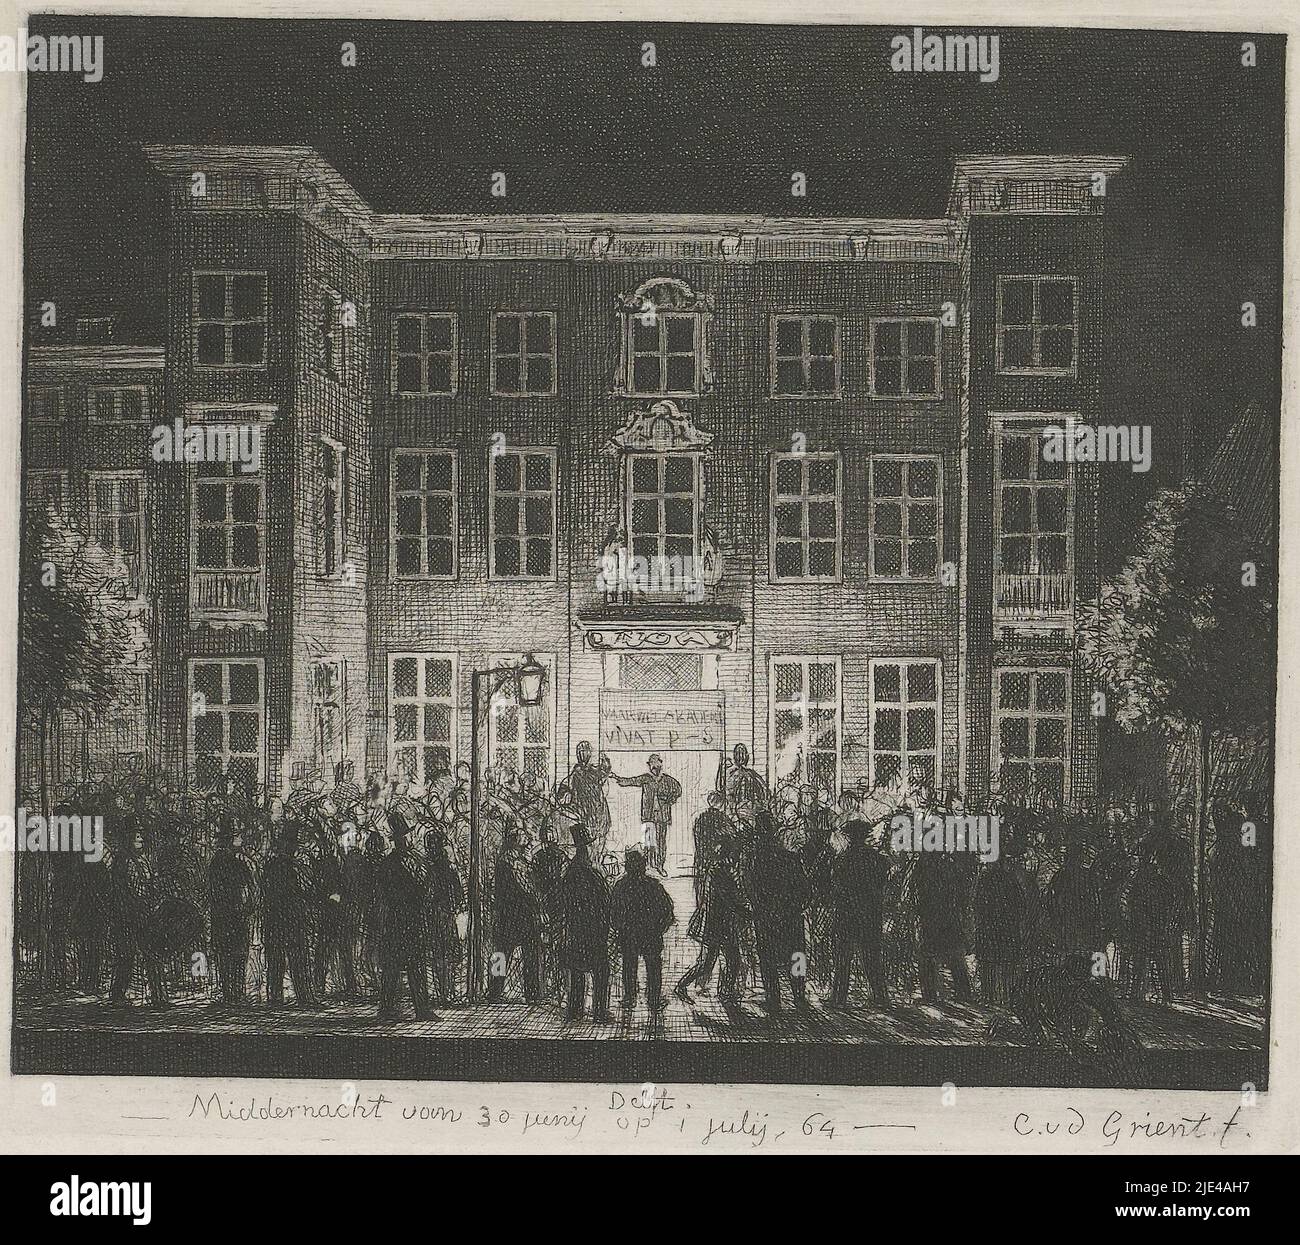 Funeral of the Delft academy, June 30, 1864, Cornelis van der Griendt, 1864 - 1866, Illumination of a house at Delft, midnight of June 30-July 1, 1864. A group of students gathered in front of an illuminated house on a canal. Above the door of the house a sign reading 'Akademia VIVAT P - S'. At the change of name from the Delft Akademie to the Delft Polytechnic School., print maker: Cornelis van der Griendt, (mentioned on object), printer: Jan Weissenbruch, 1864 - 1866, paper, etching, drypoint, h 132 mm - w 147 mm Stock Photo